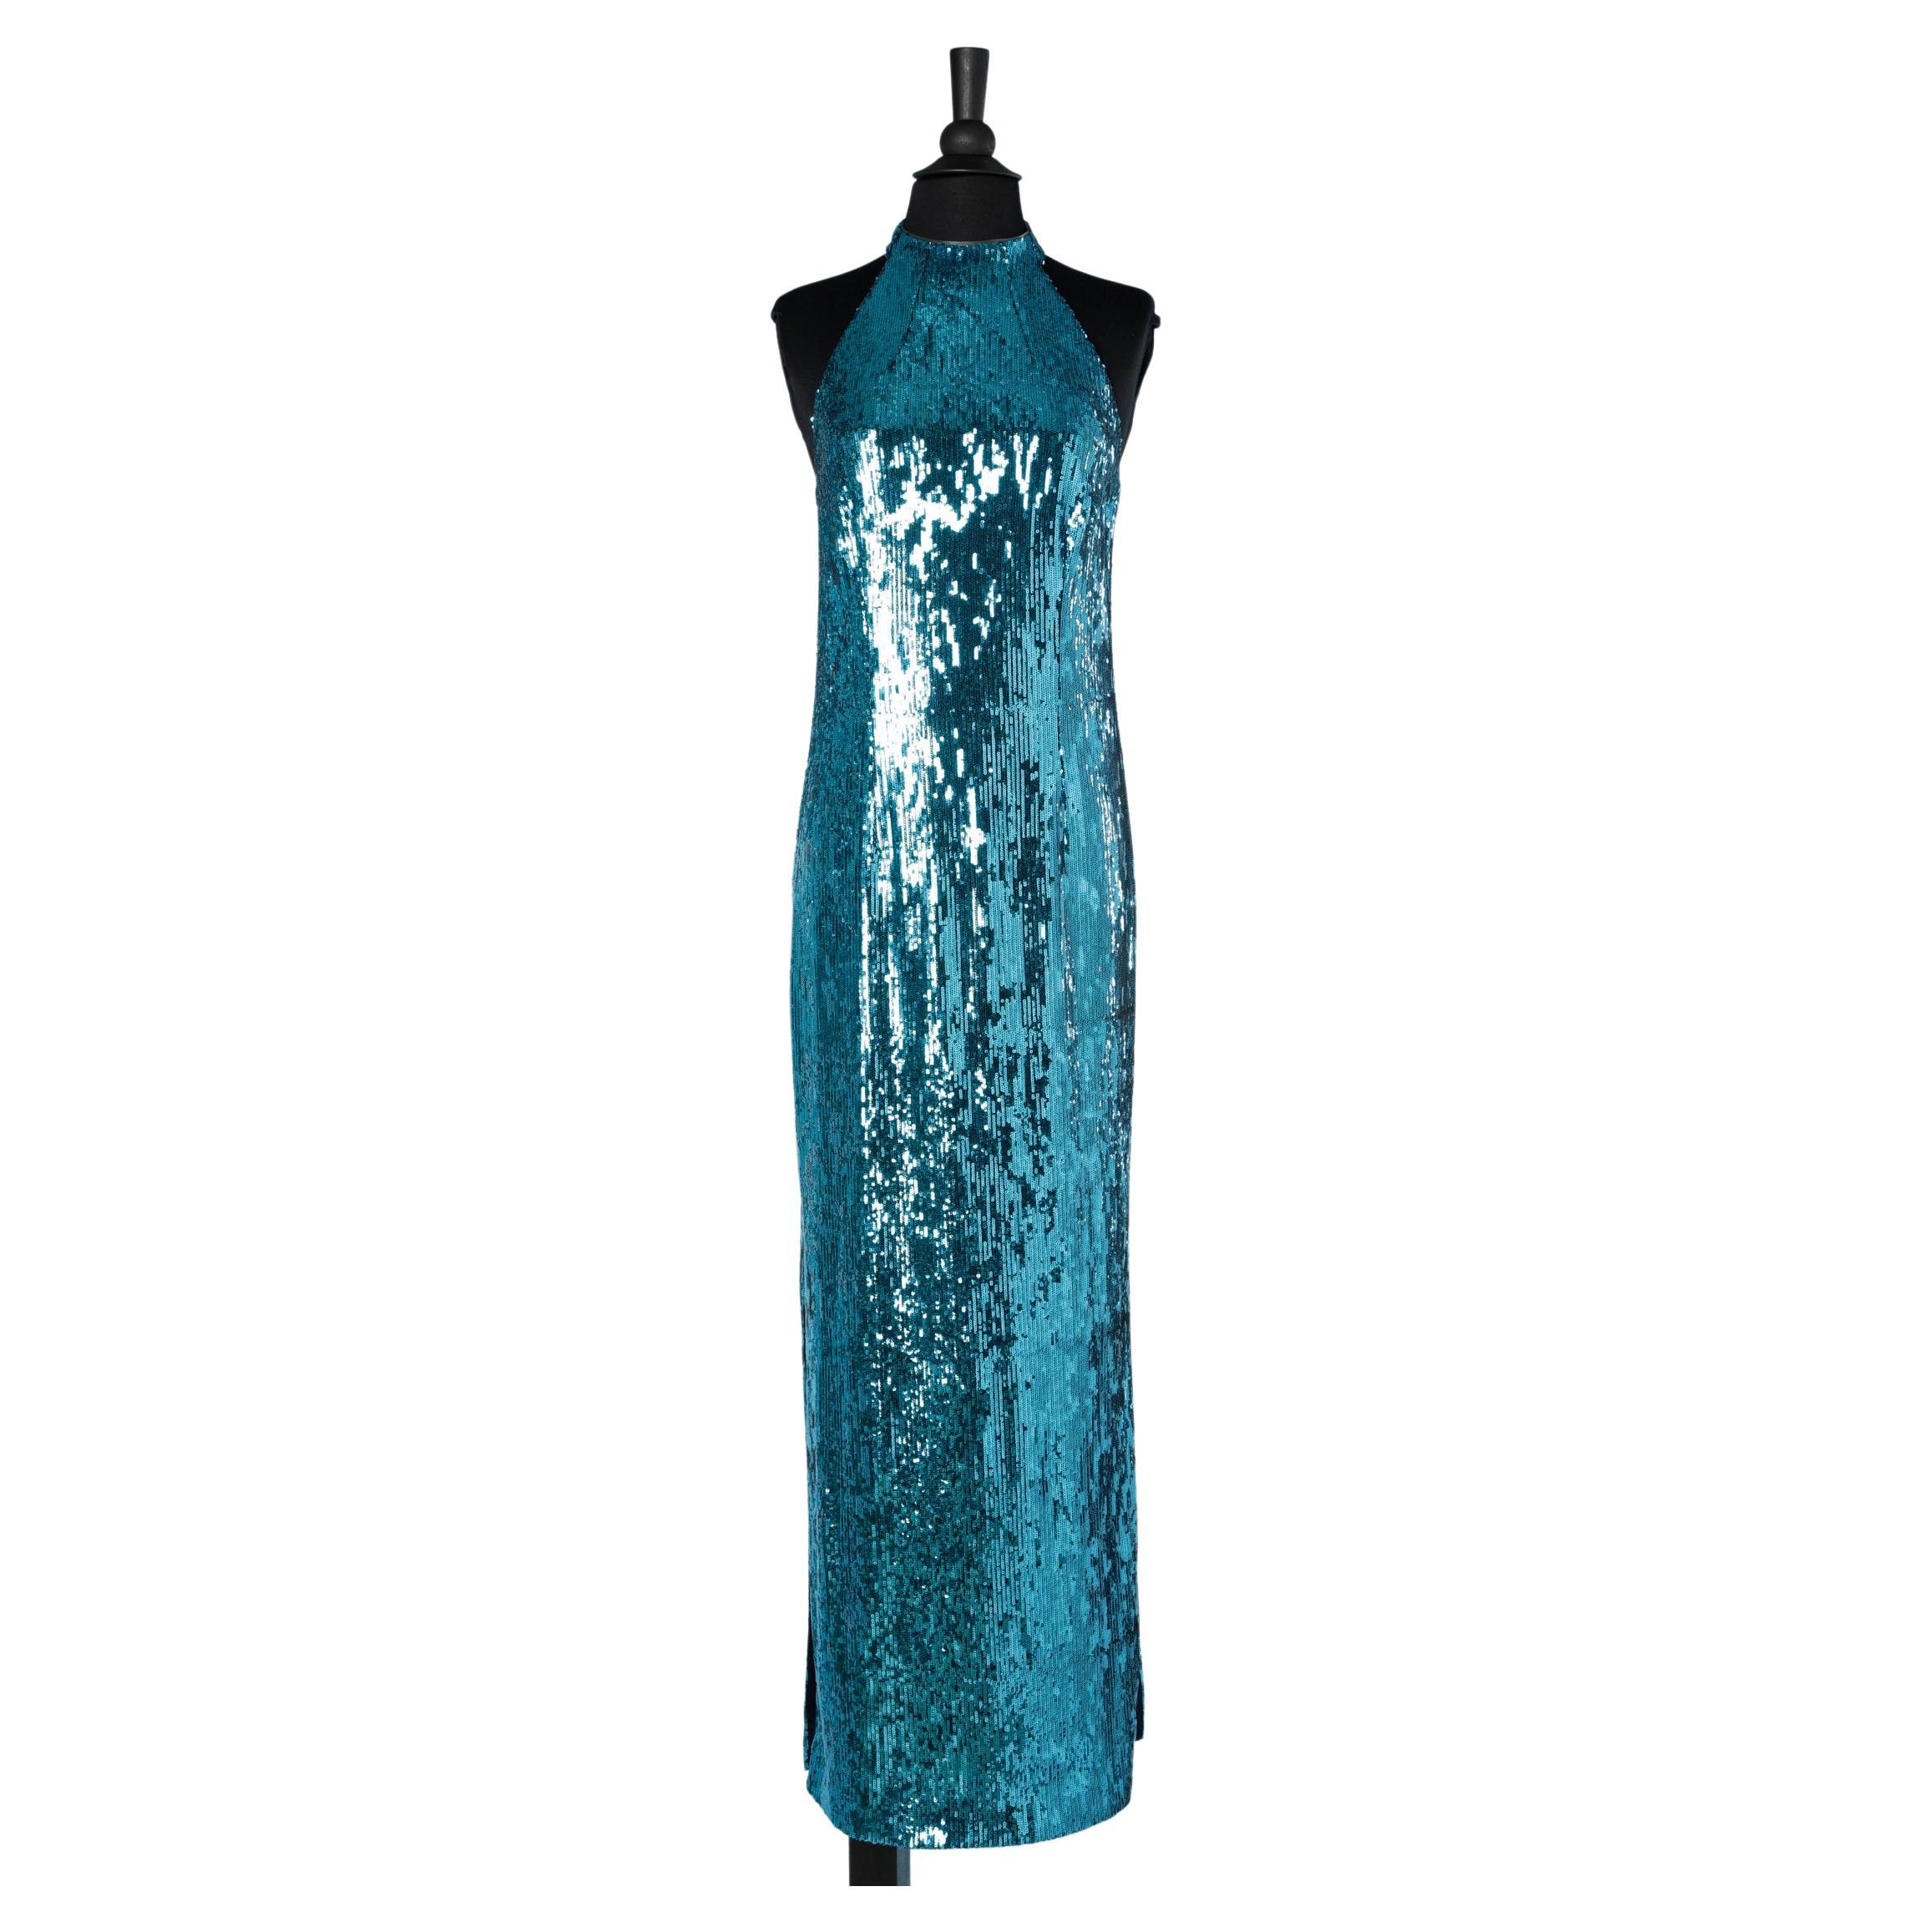 Turquoise blue sequin dress sleeveless and backless Galvan London  For Sale